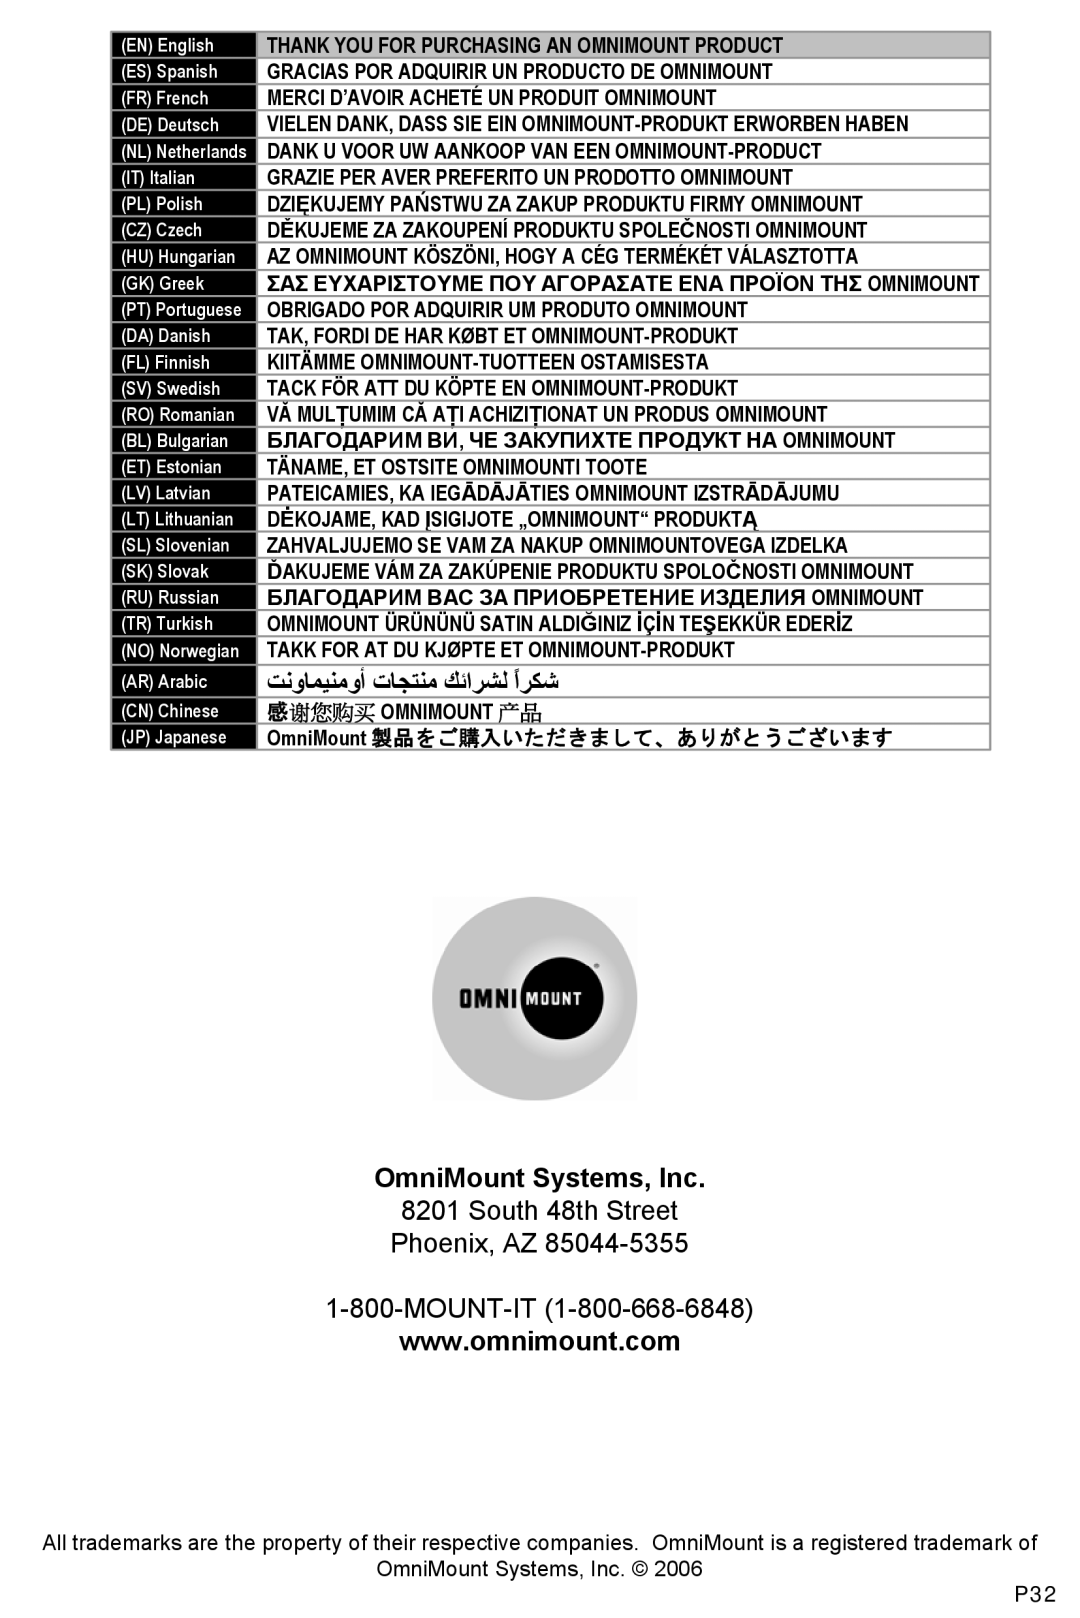 Omnimount NC125CI, 1004164 OmniMount Systems, Inc, Thank You For Purchasing An Omnimount Product, 感 谢 您 购买 Omnimount 产 品 